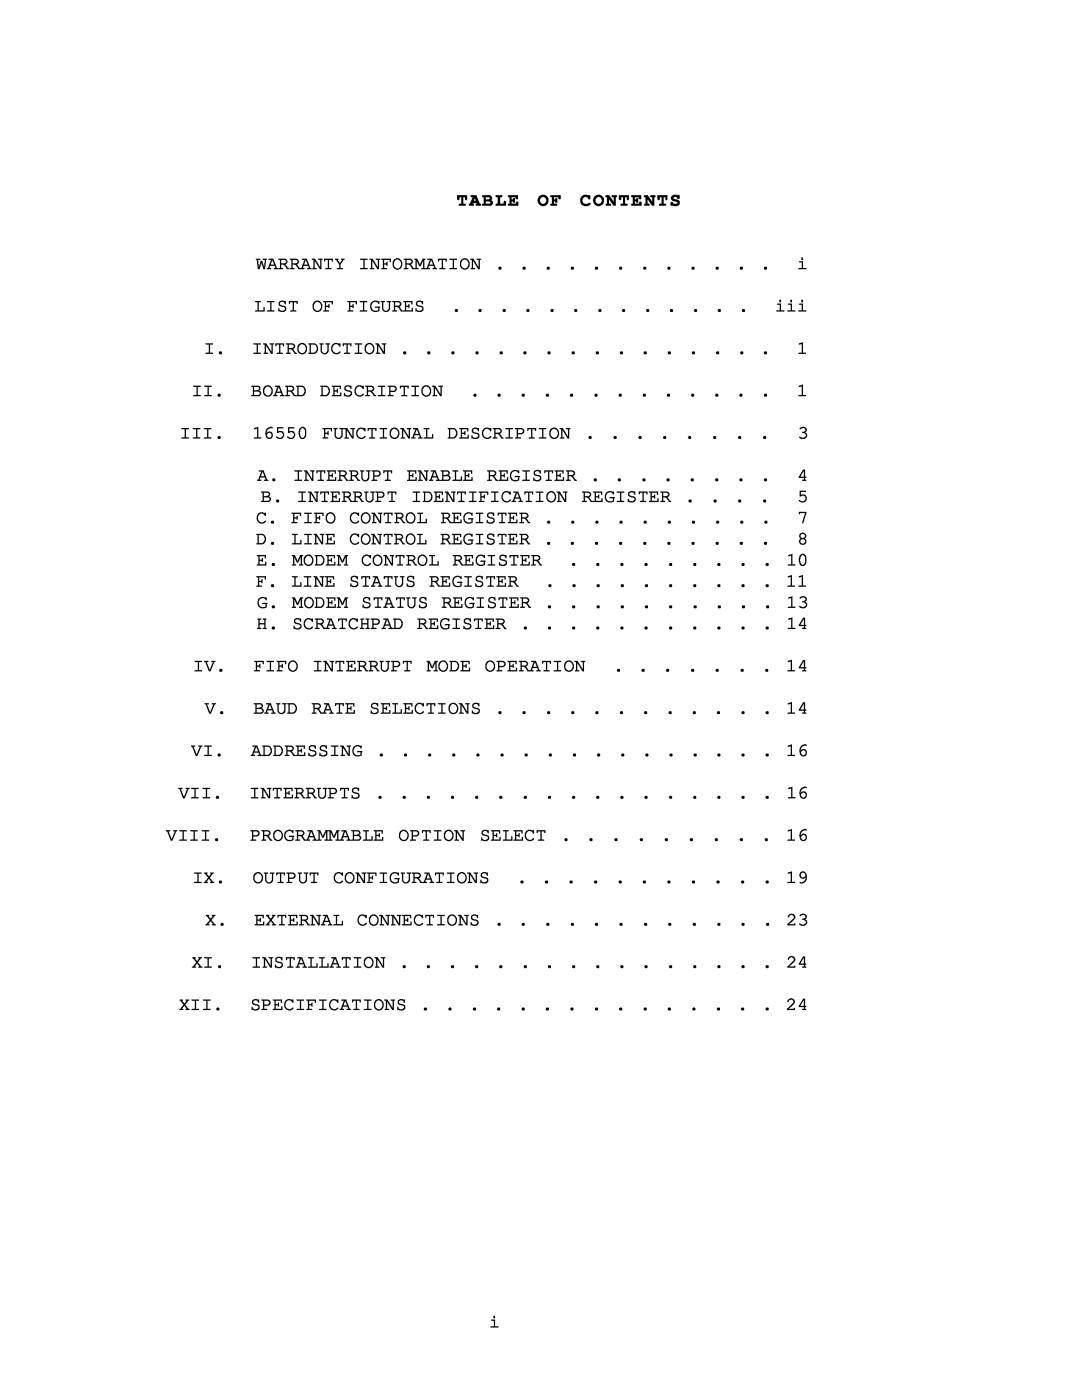 IBM DS-2000 warranty Table Of Contents 